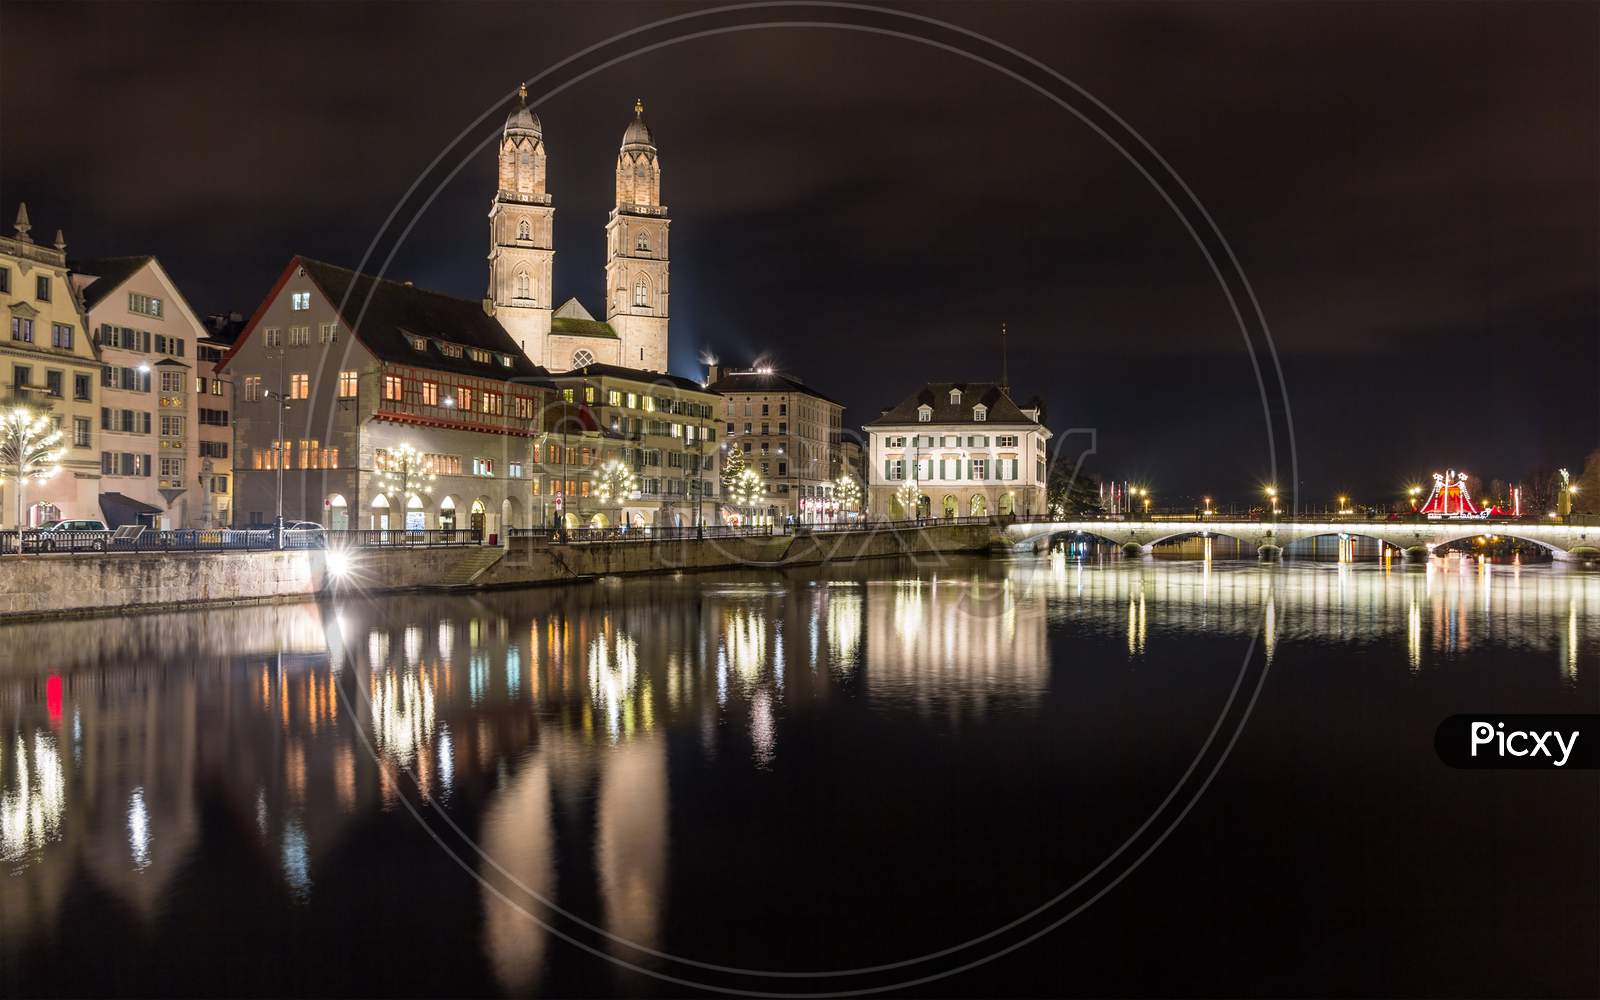 Zurich On Banks Of Limmat River At Winter Evening